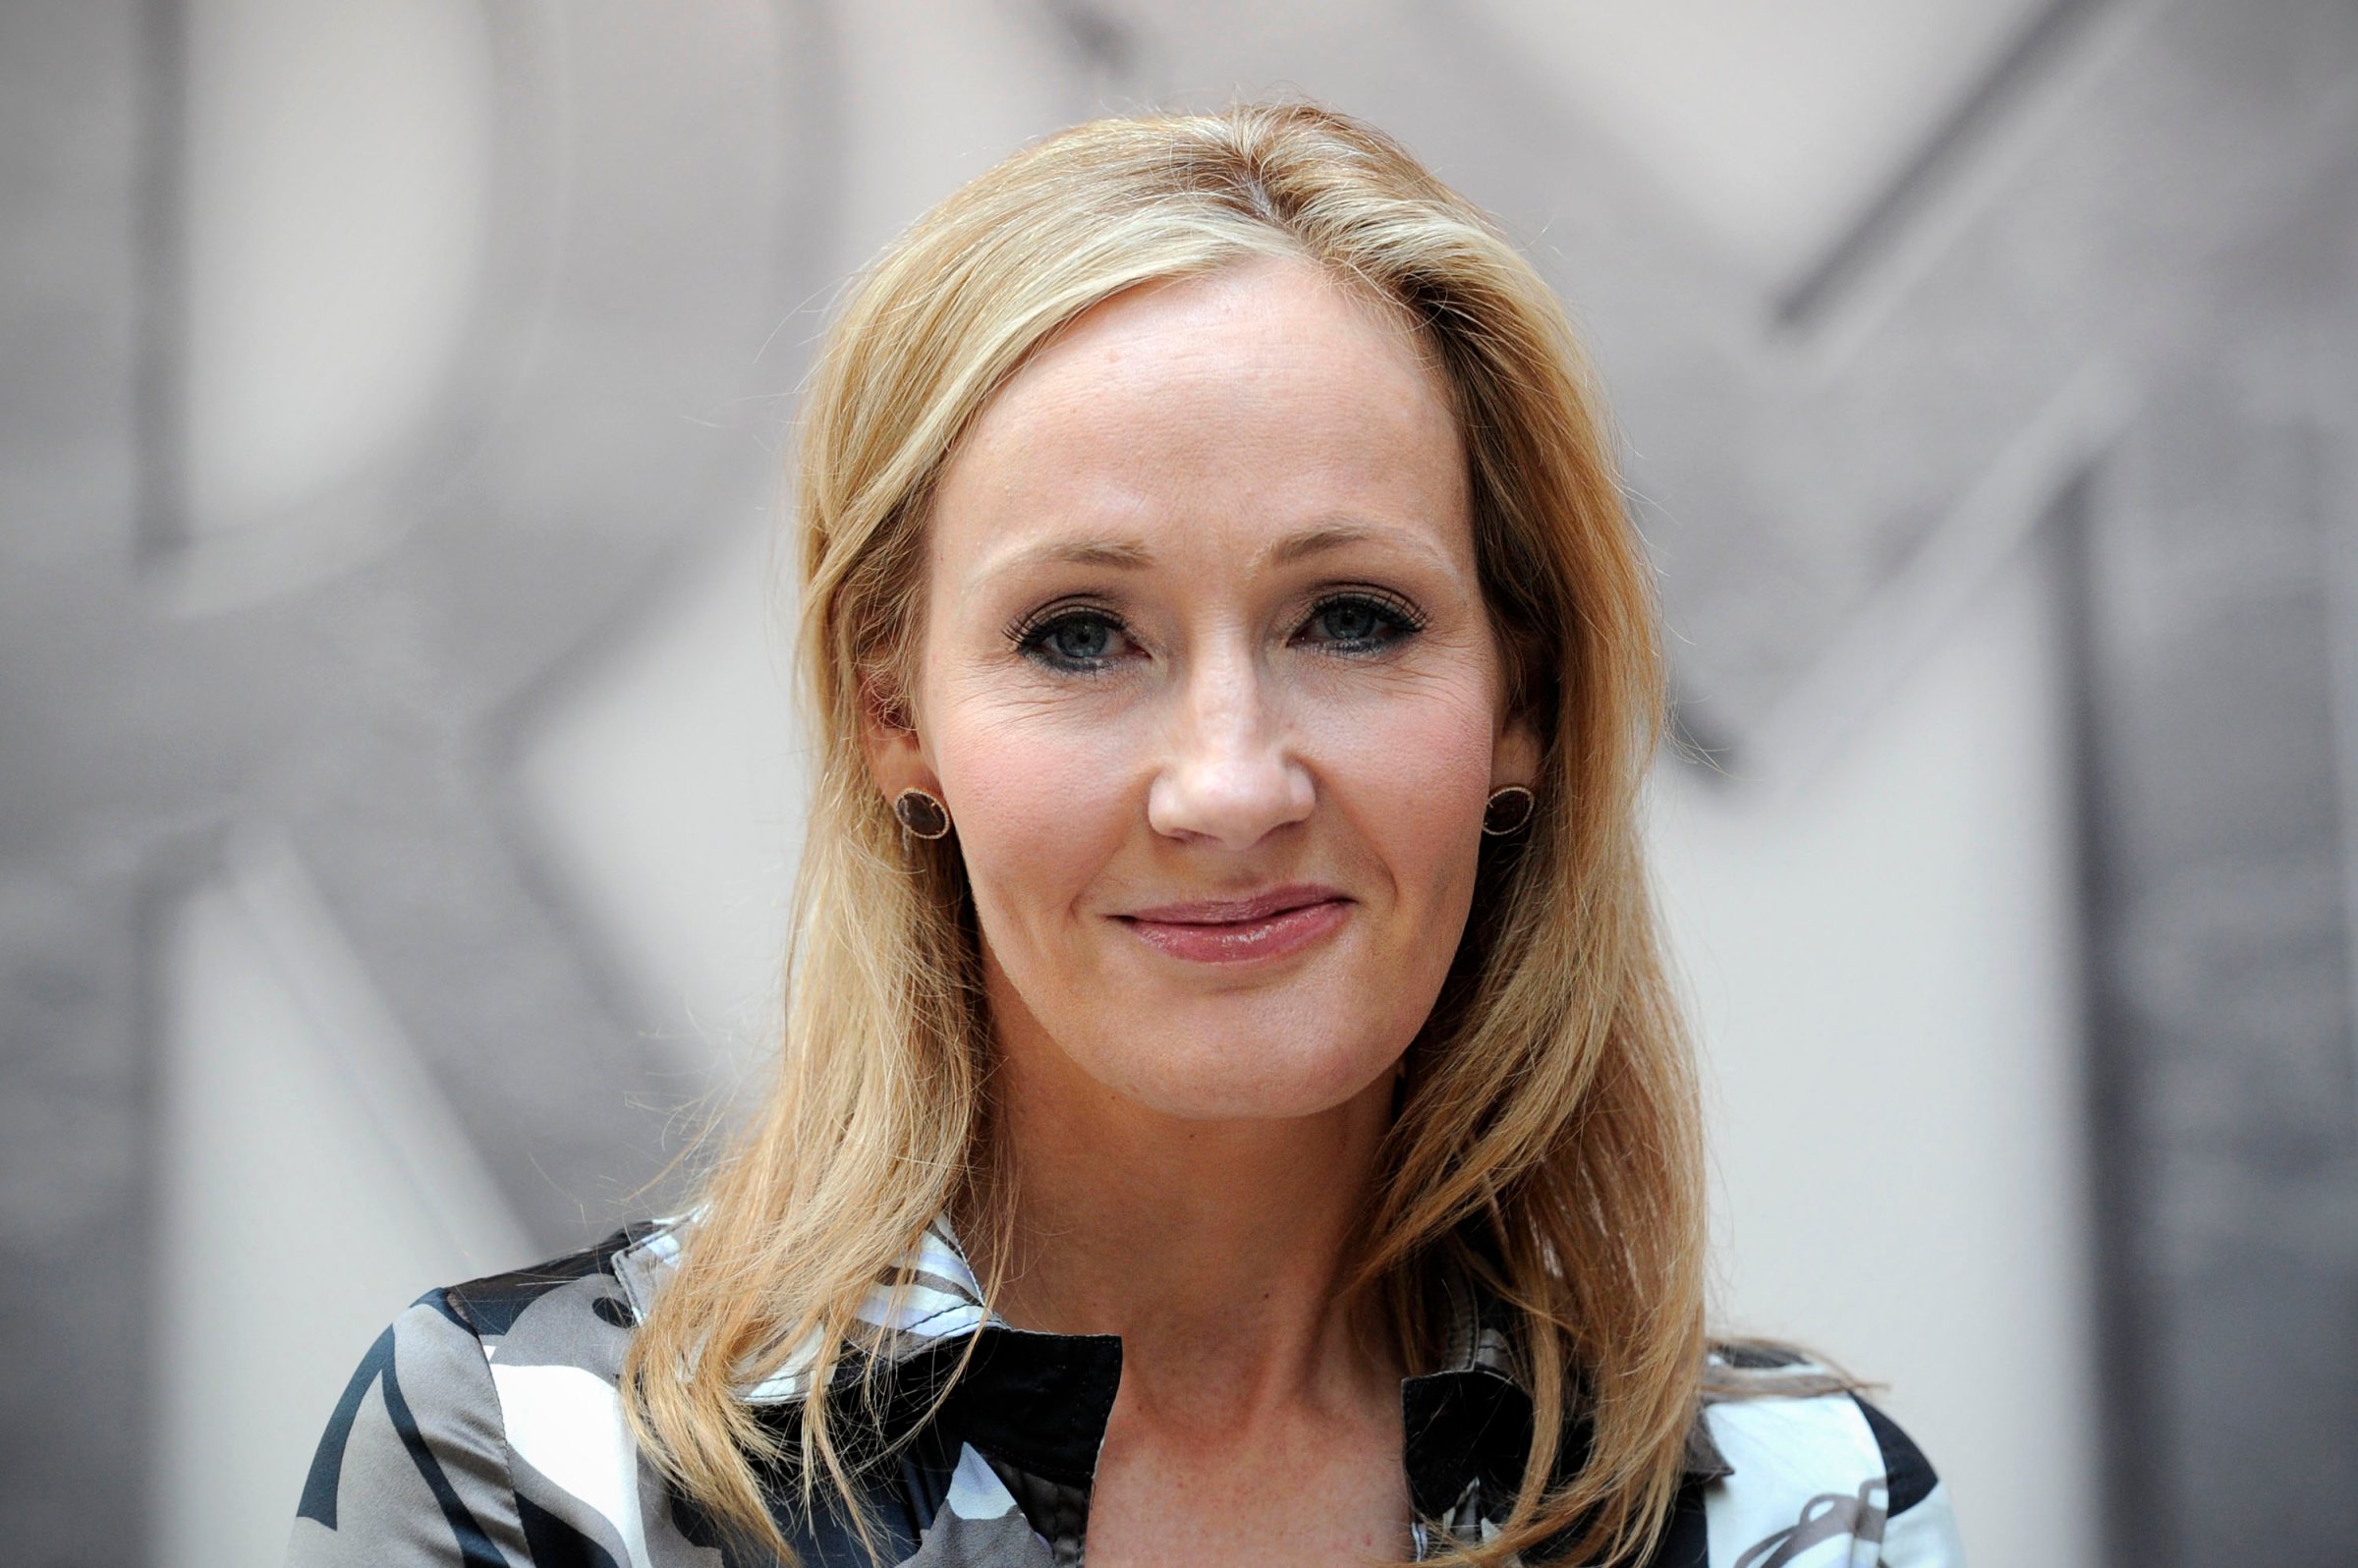 Harry Potter creator J.K. Rowling poses for photographers in central London, on June 23, 2011.